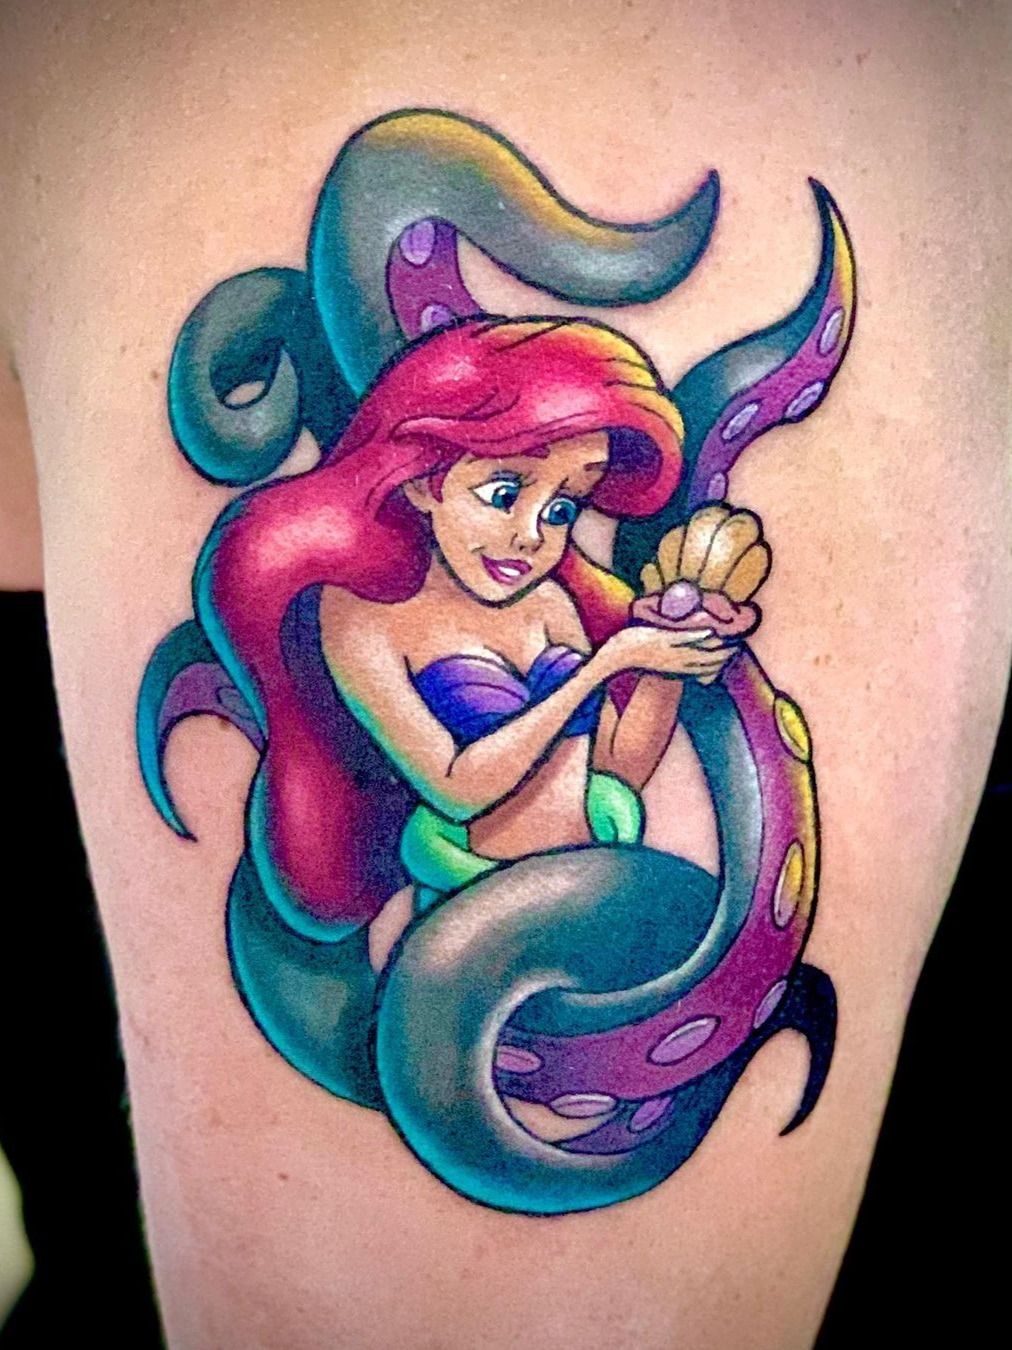 The Disney Tattoo Part Deux Think You Could Ever Get a Disney Tattoo   Mouze Kateerz